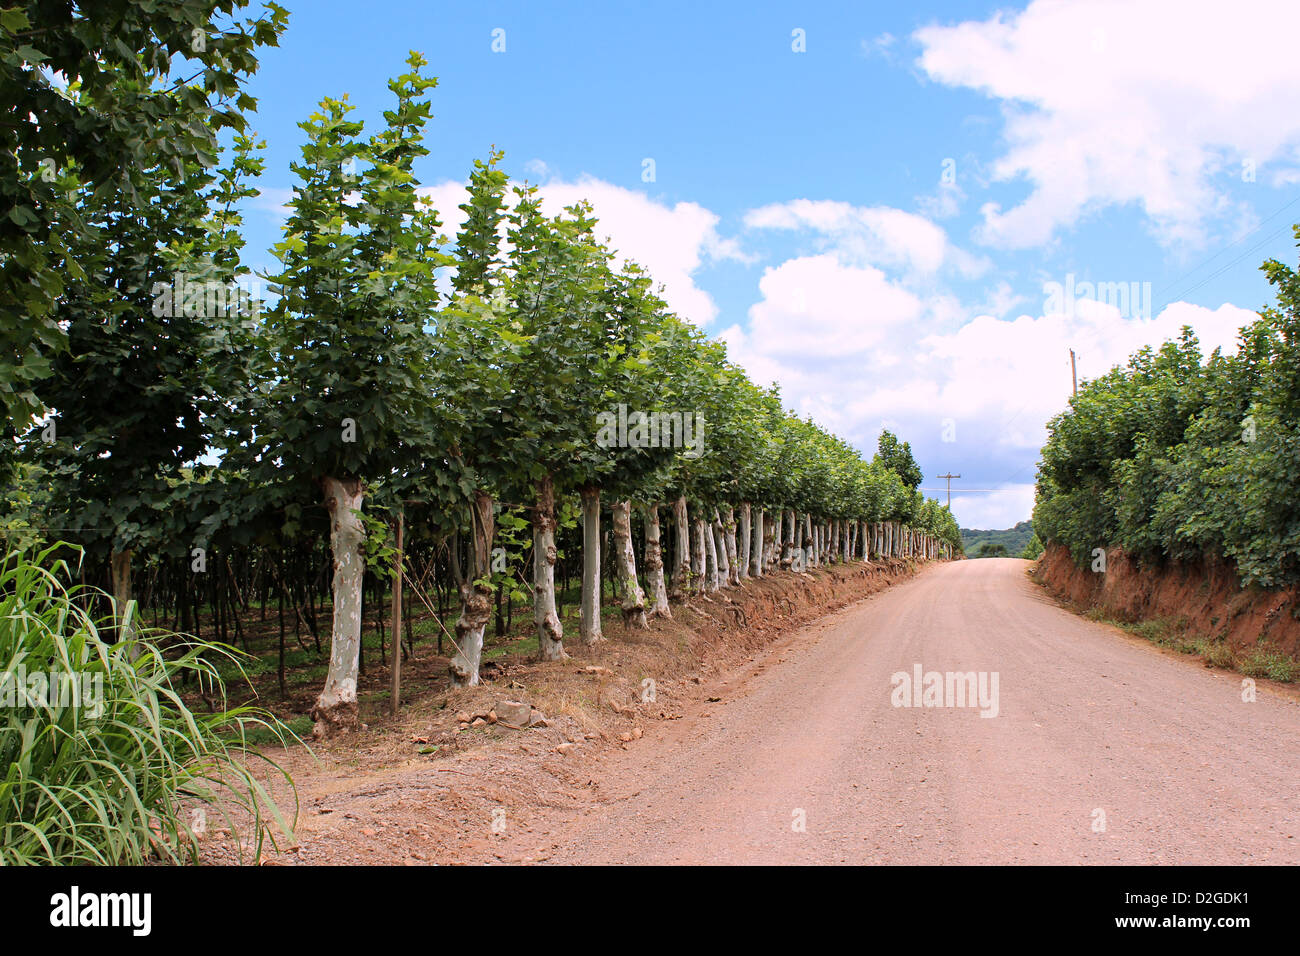 Photo of a dirt road inside Bento Gonçalves. Plantains and forms a perfect symmetry vineyards under blue sky. Stock Photo